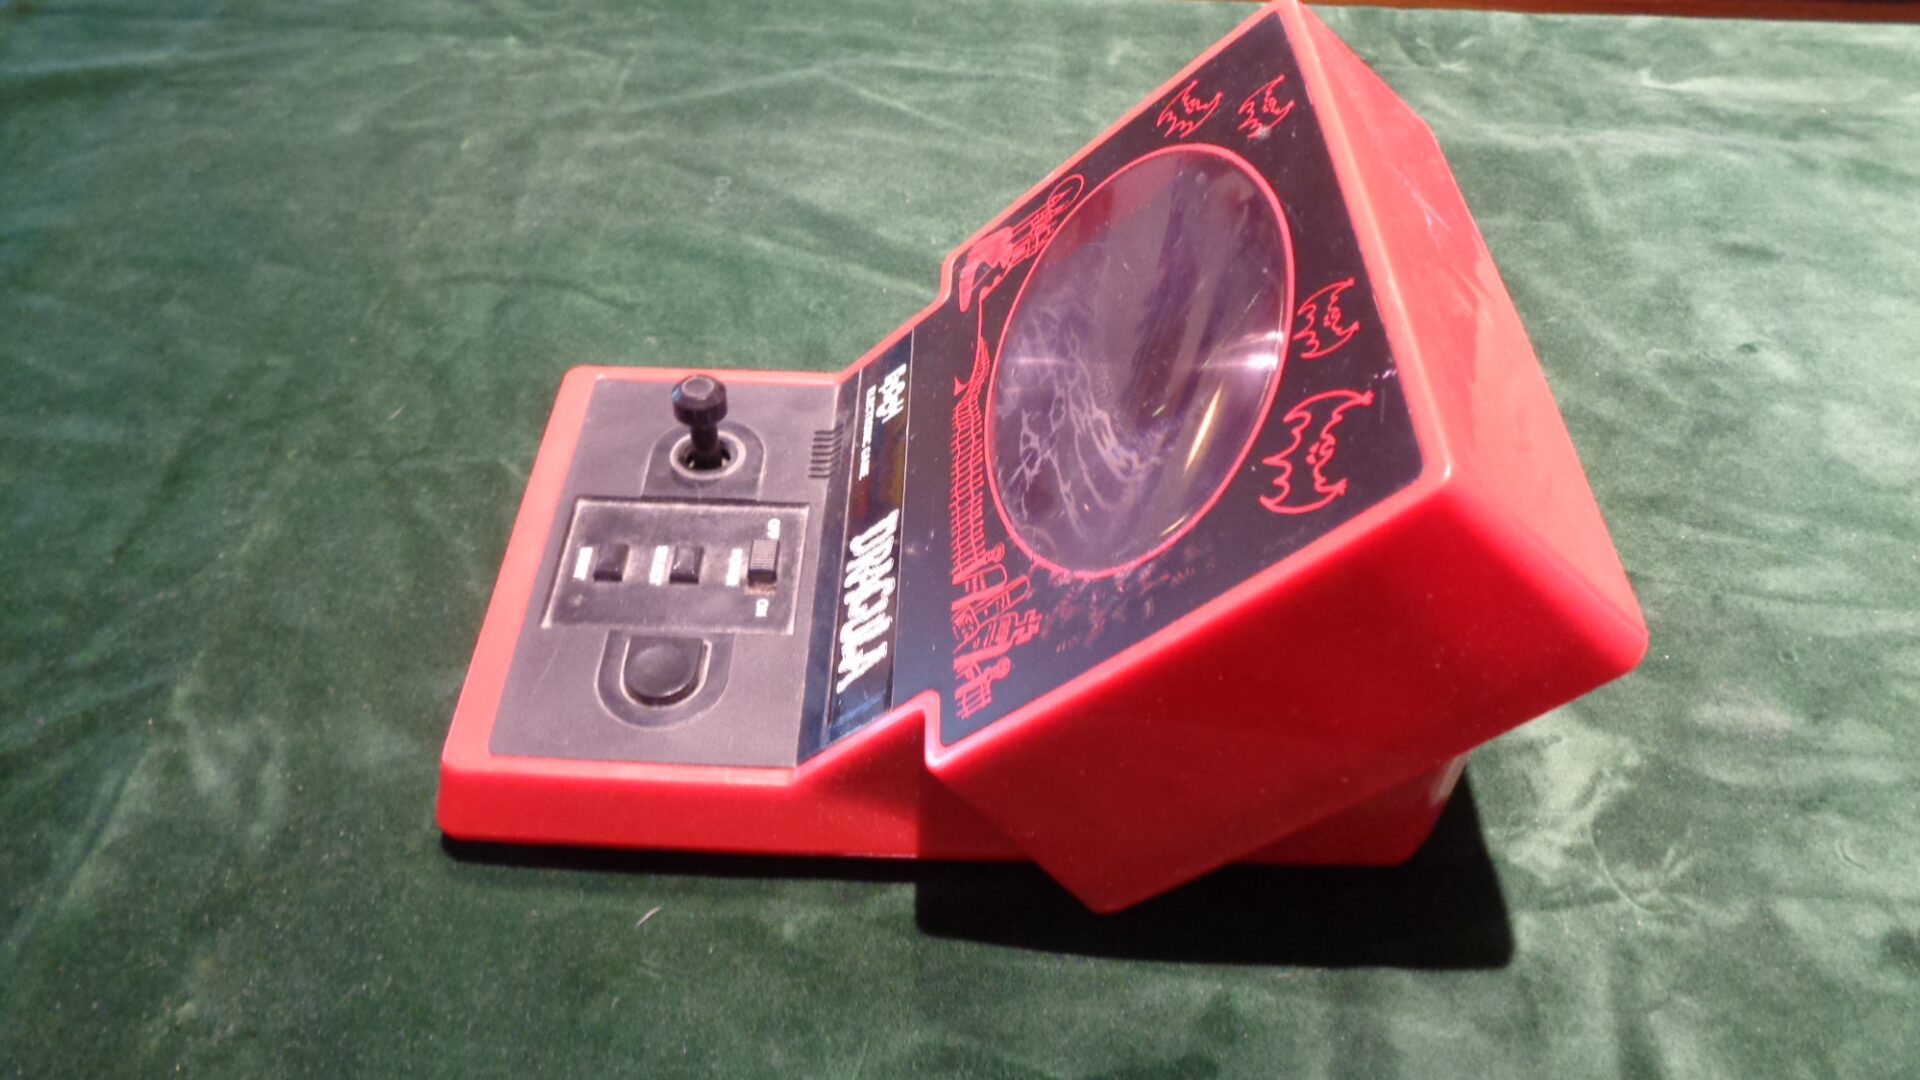 Dracula Table Top Hand Held Arcade Electronic Game